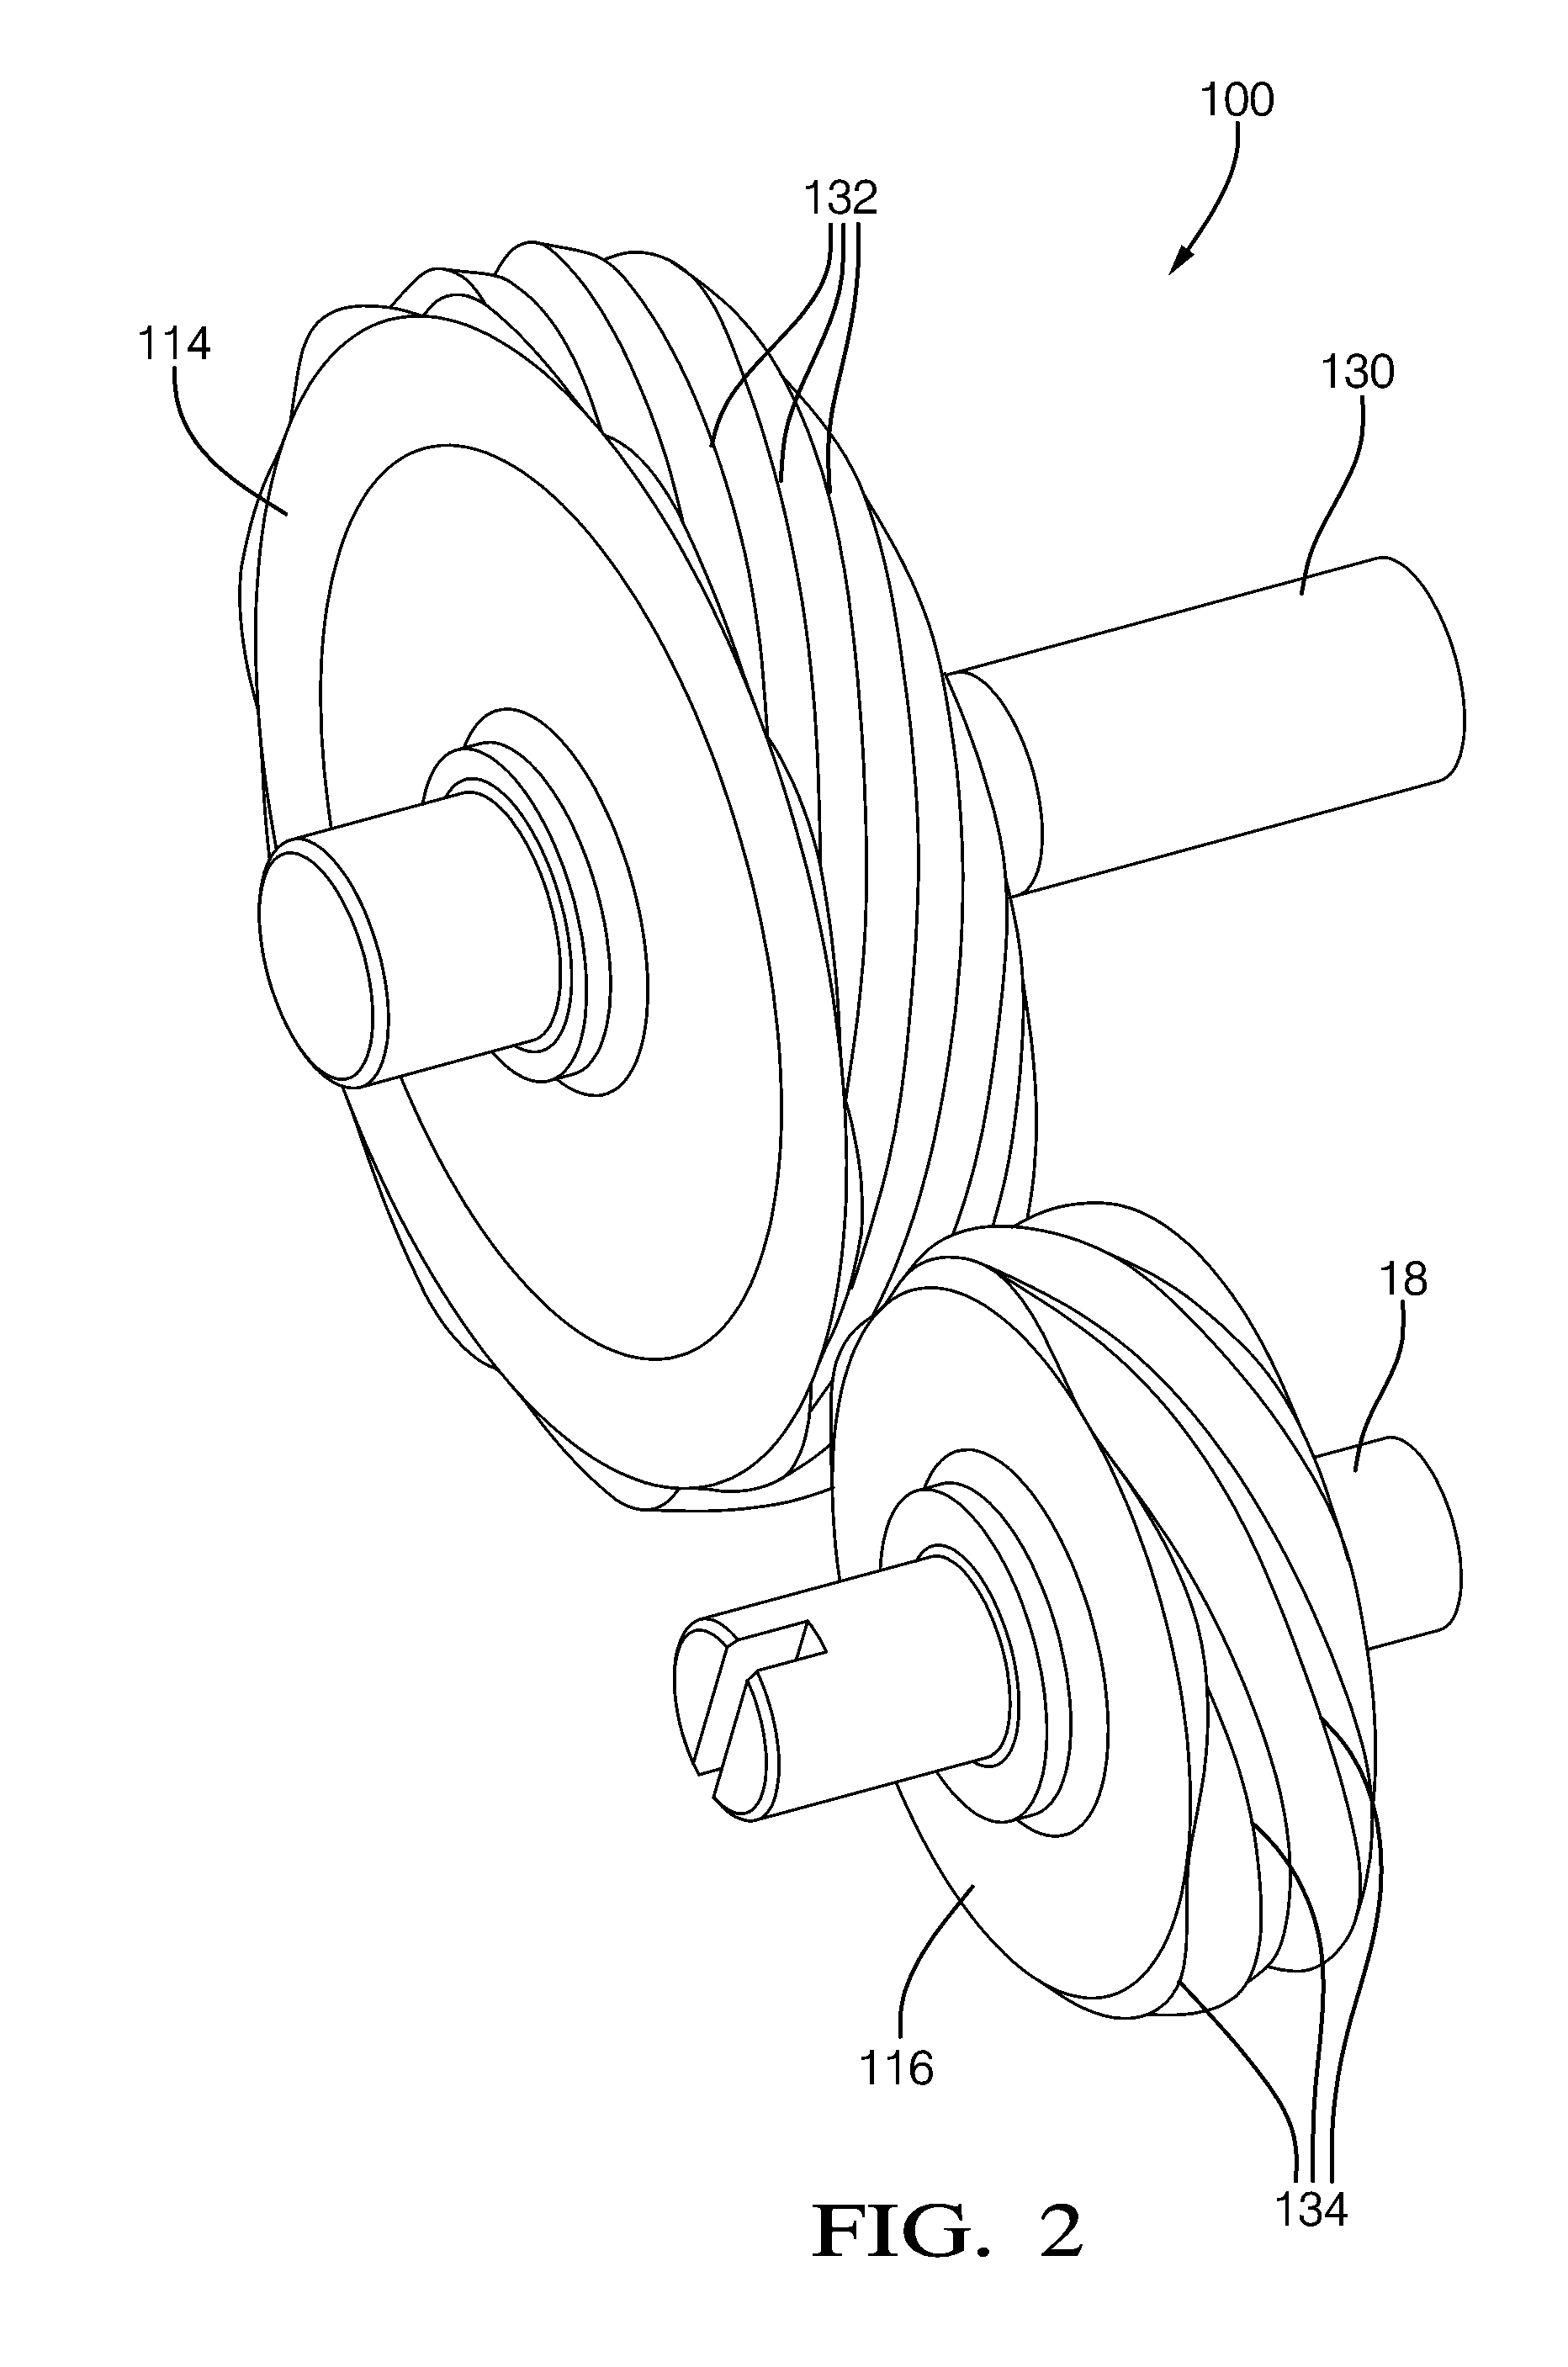 Actuator with self-locking helical gears for a continuously variable valve lift system